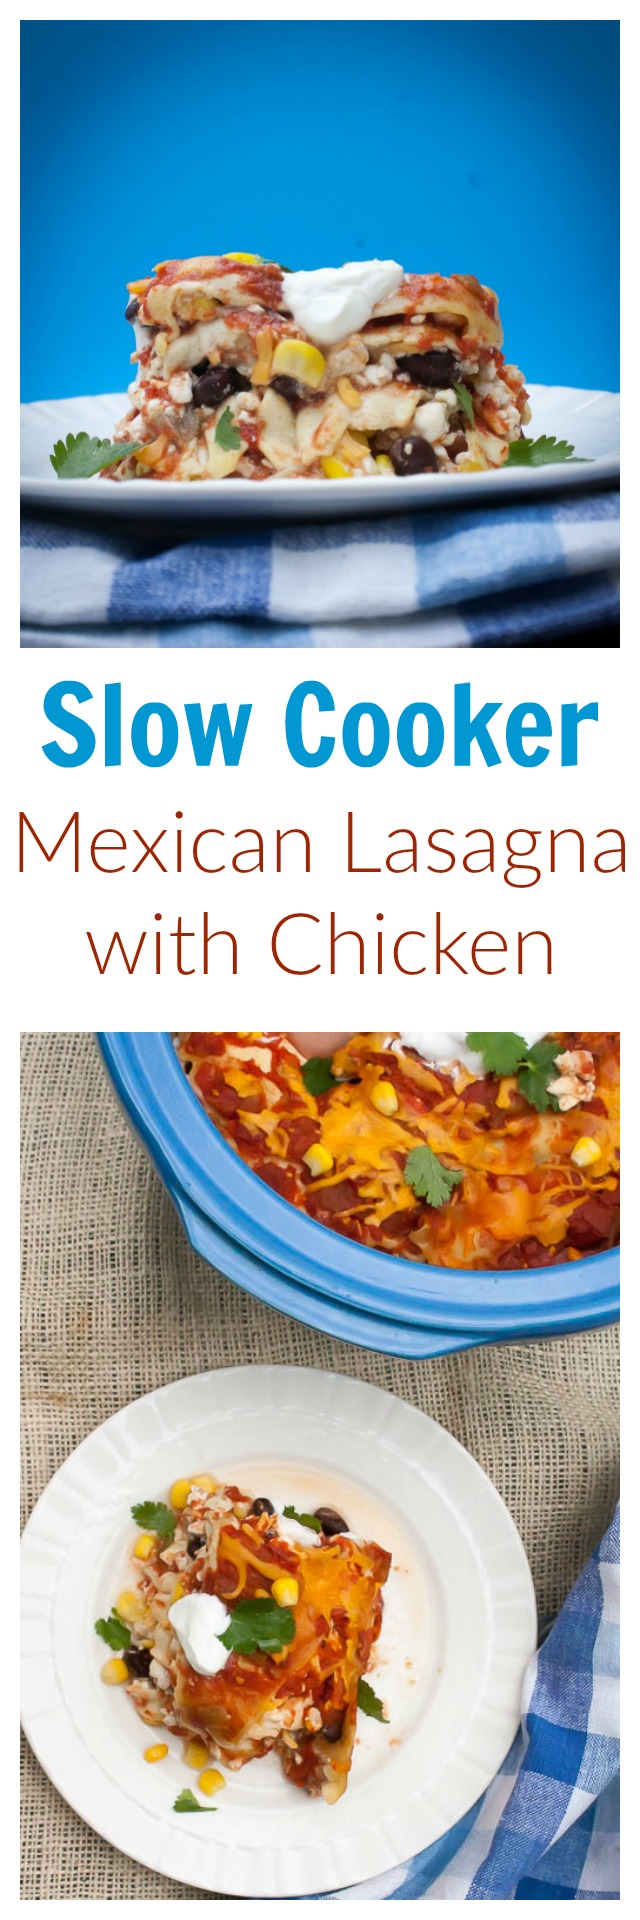 SLOW COOKER MEXICAN LASAGNA WITH CHICKEN | @tspcurry